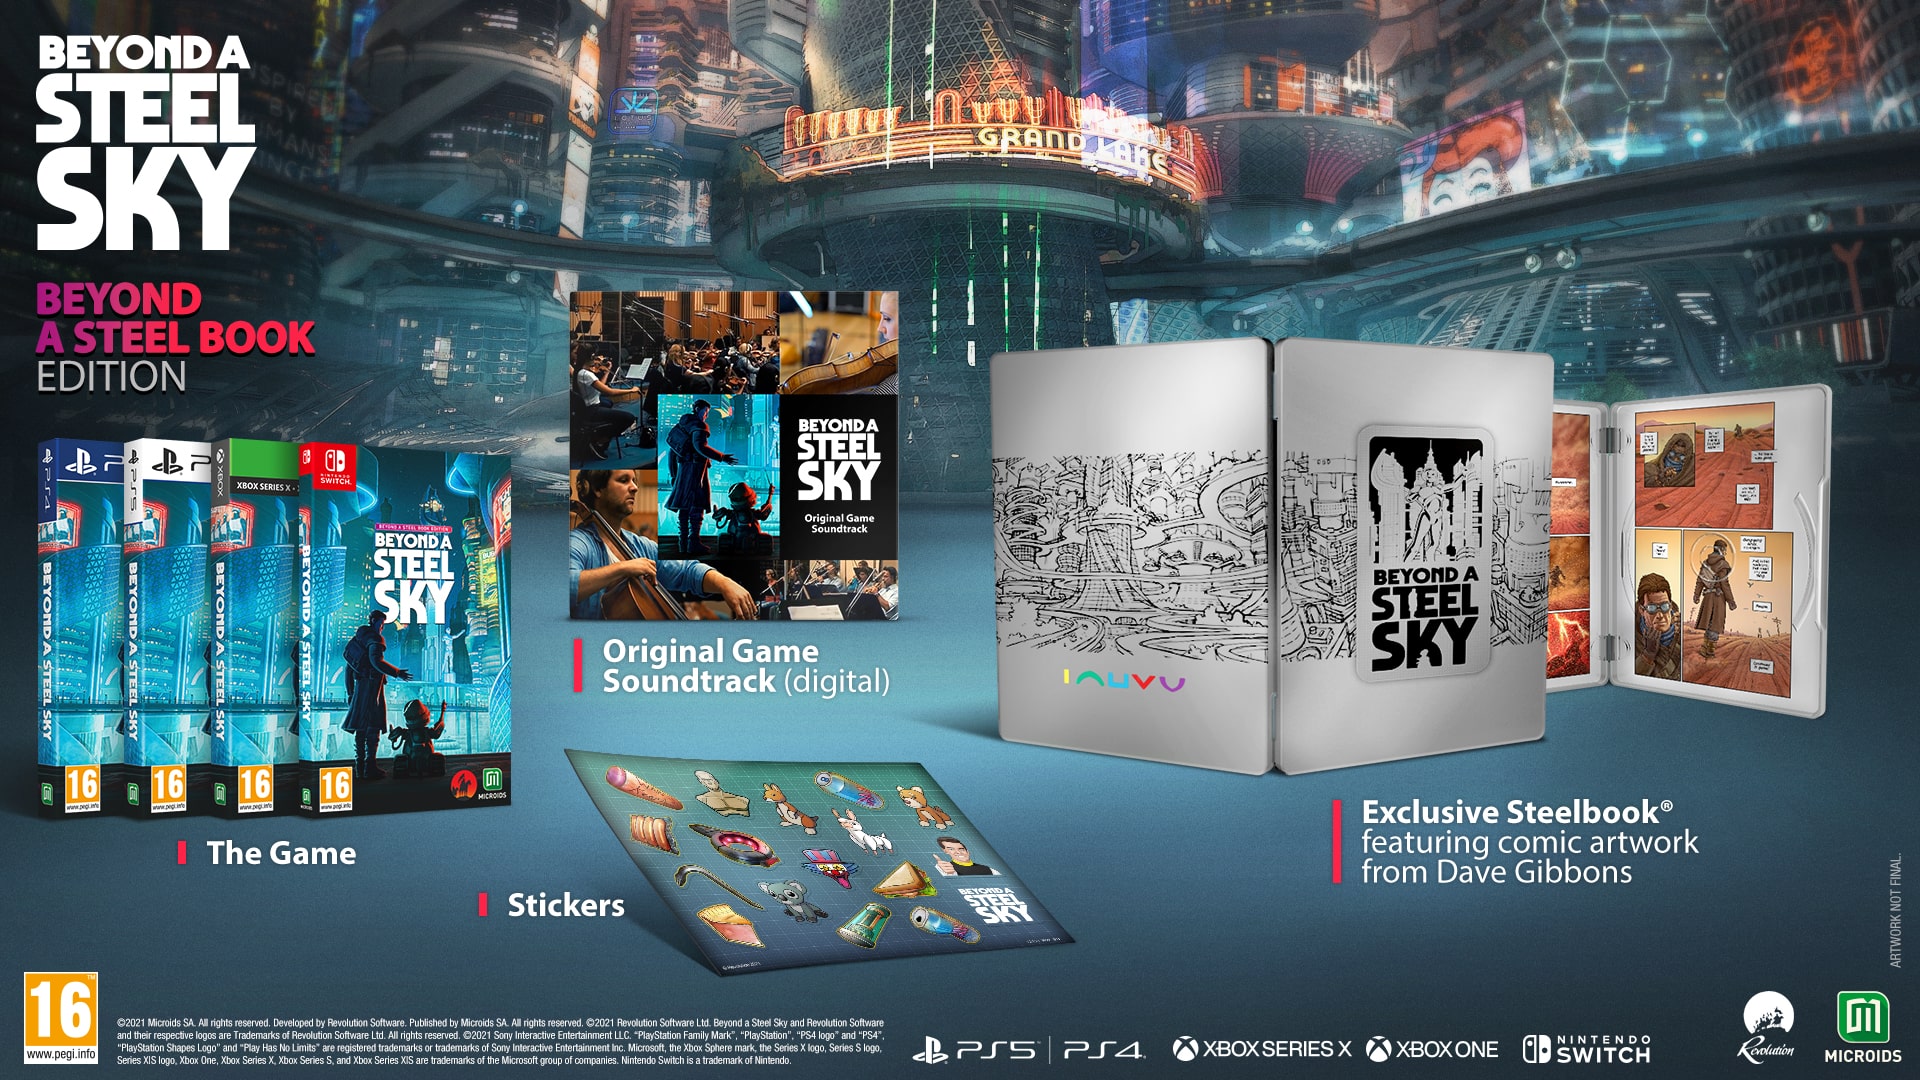 A photo of the Beyond A Steel Sky SteelBook Edition